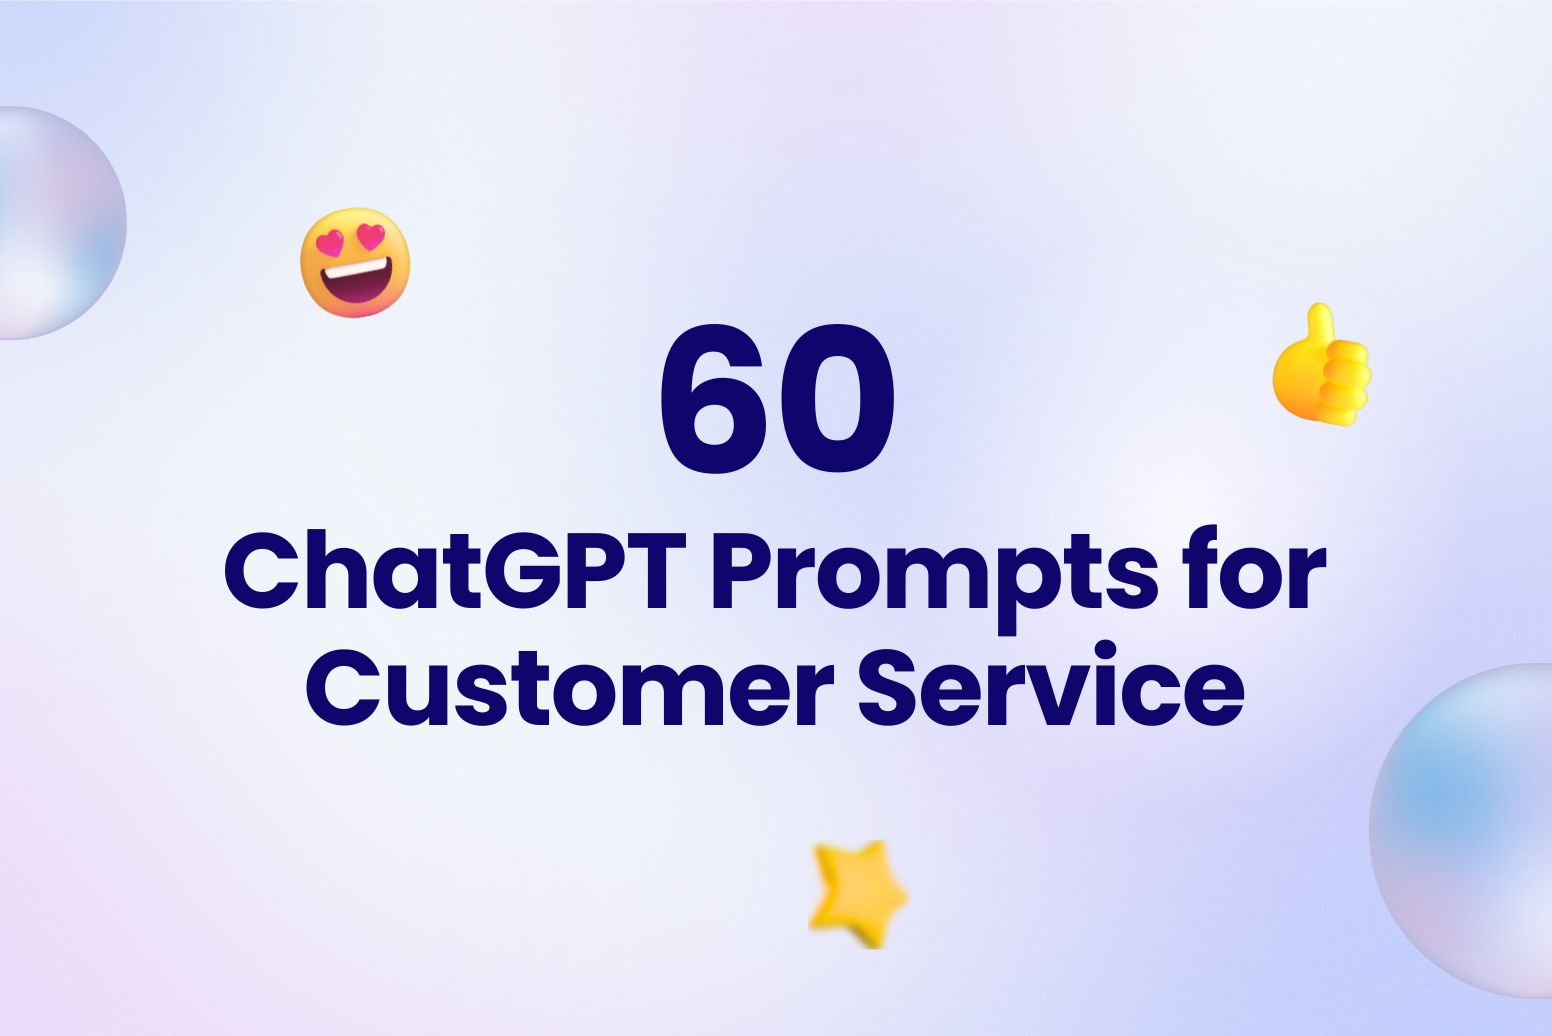 60 ChatGPT Prompts for Customer Service